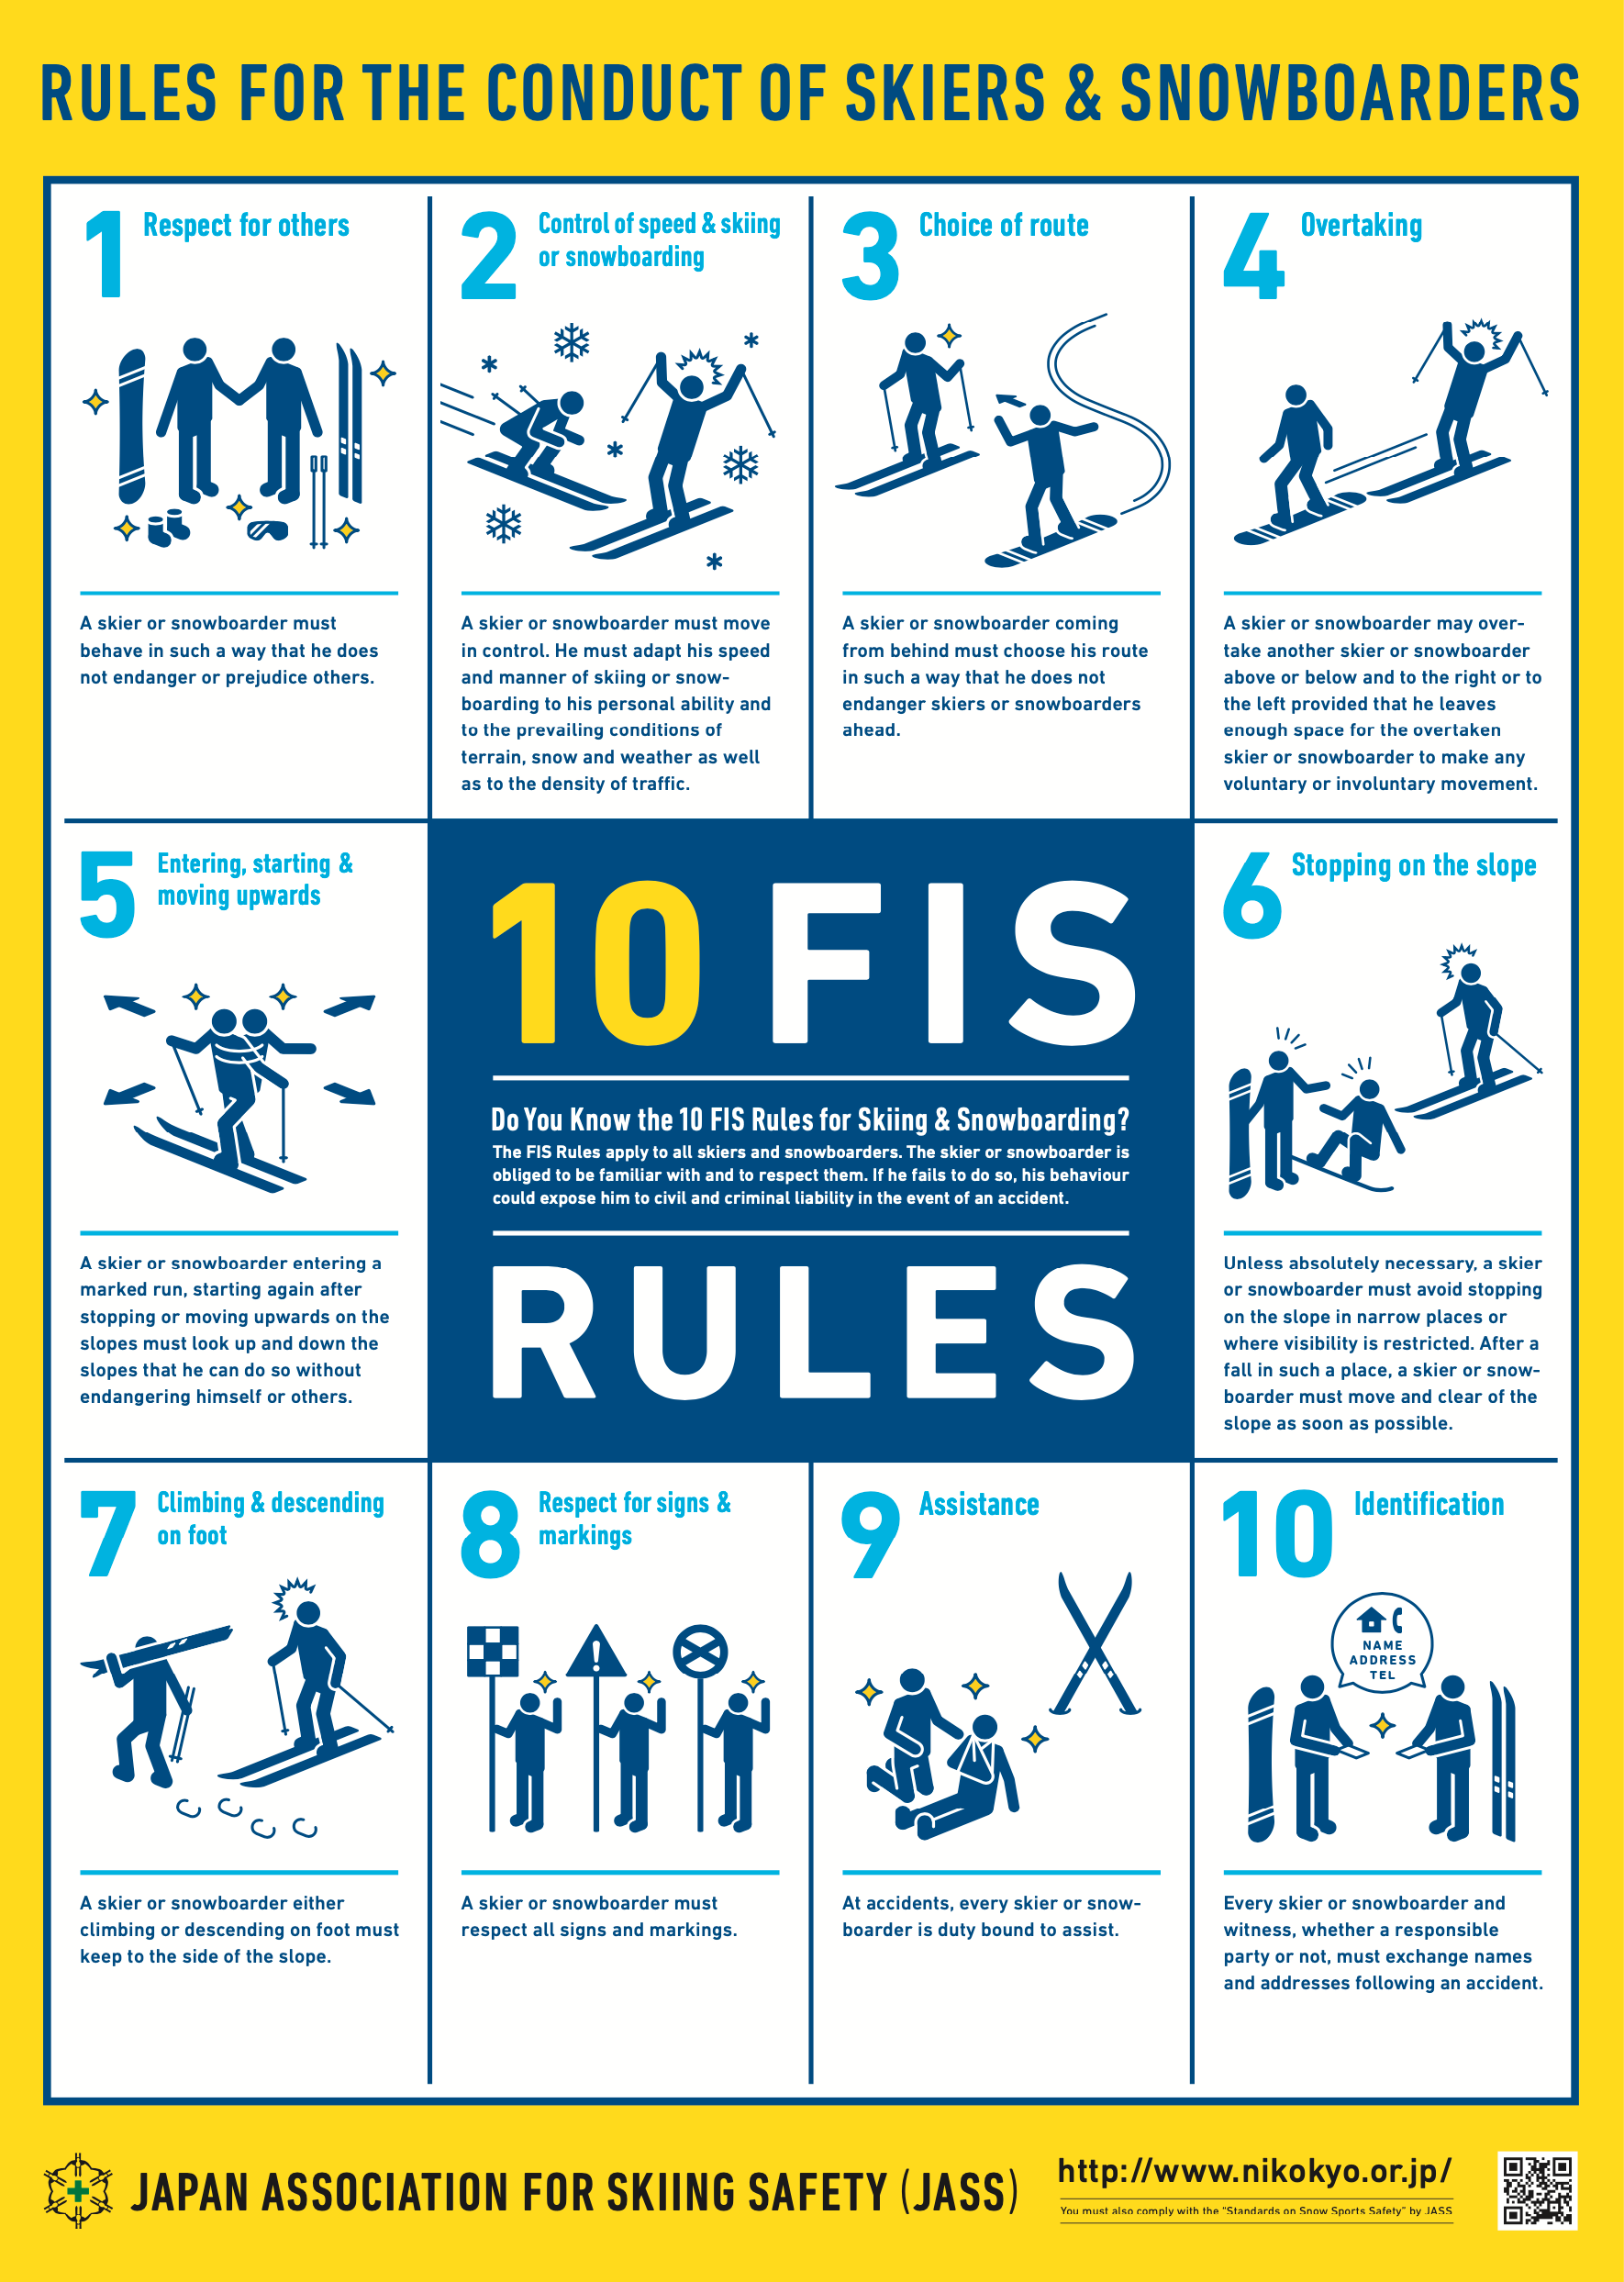 Ski Area Safety and Rules